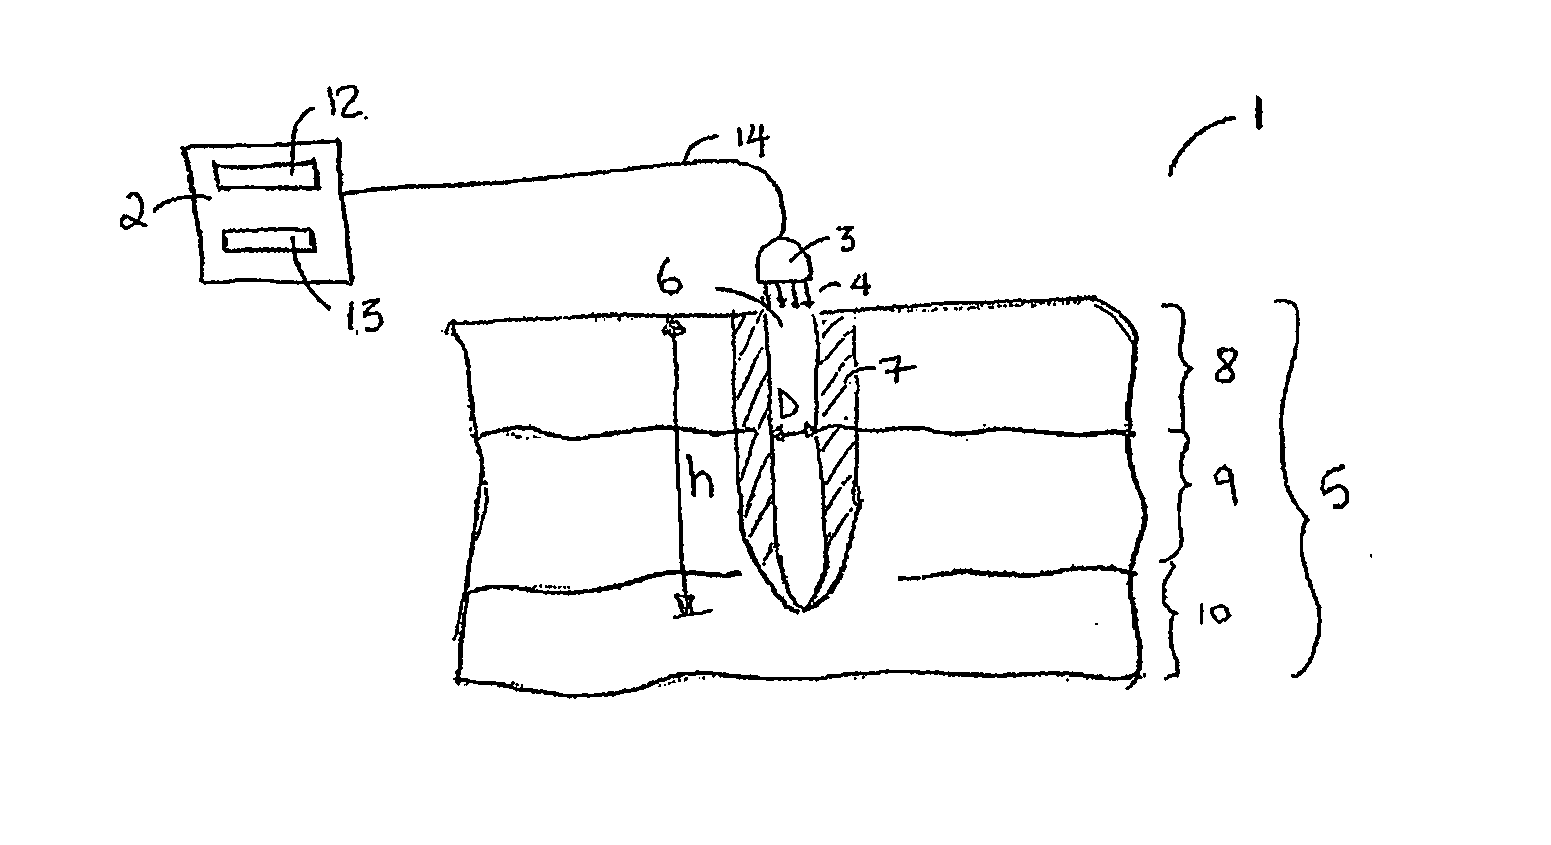 System and method for microablation of tissue